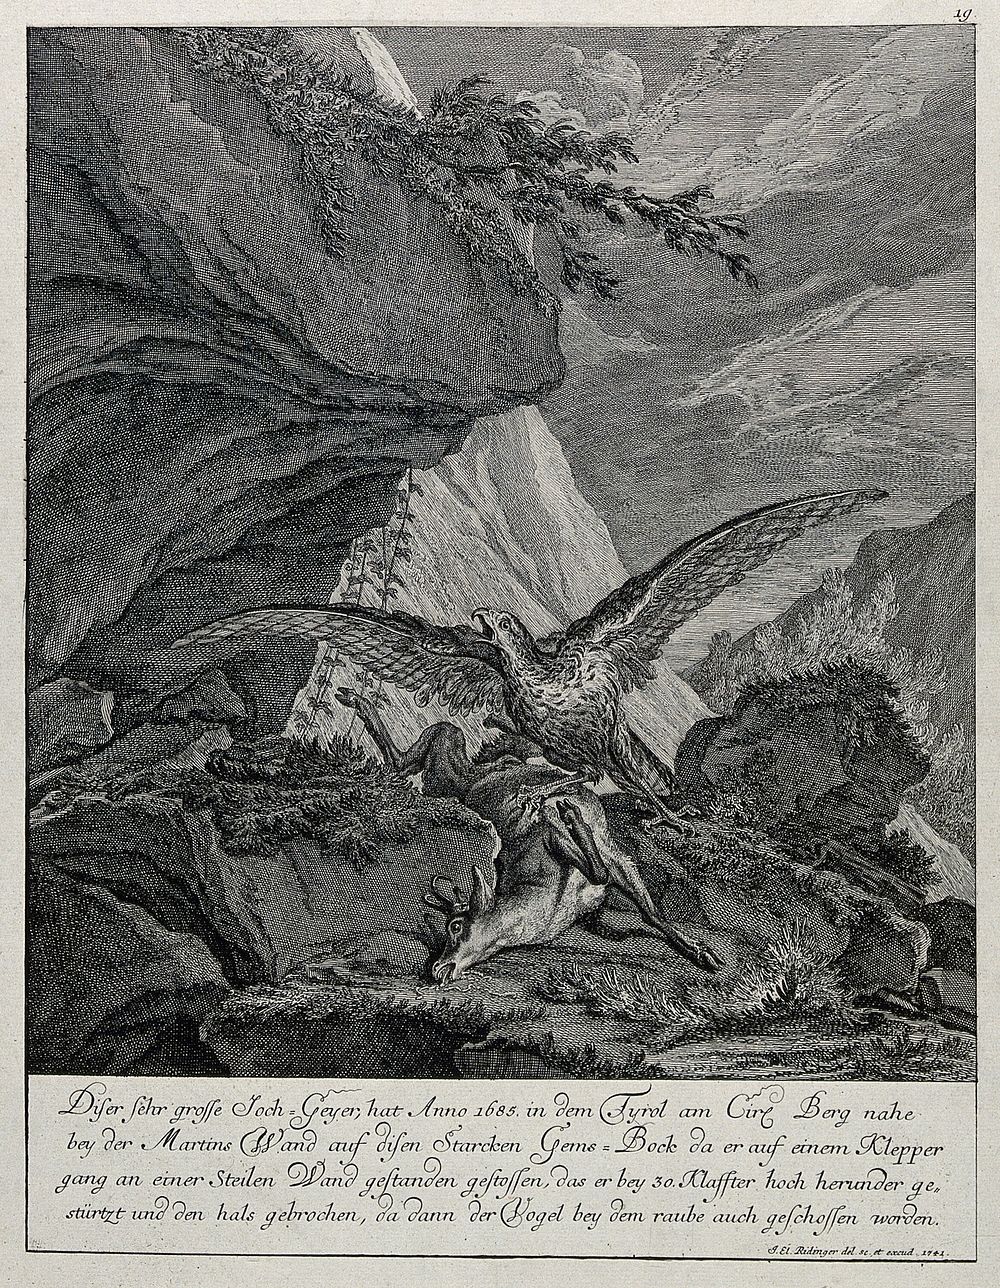 A mountain landscape with a vulture hovering over its prey, a chamois buck. Etching by J.E. Ridinger.